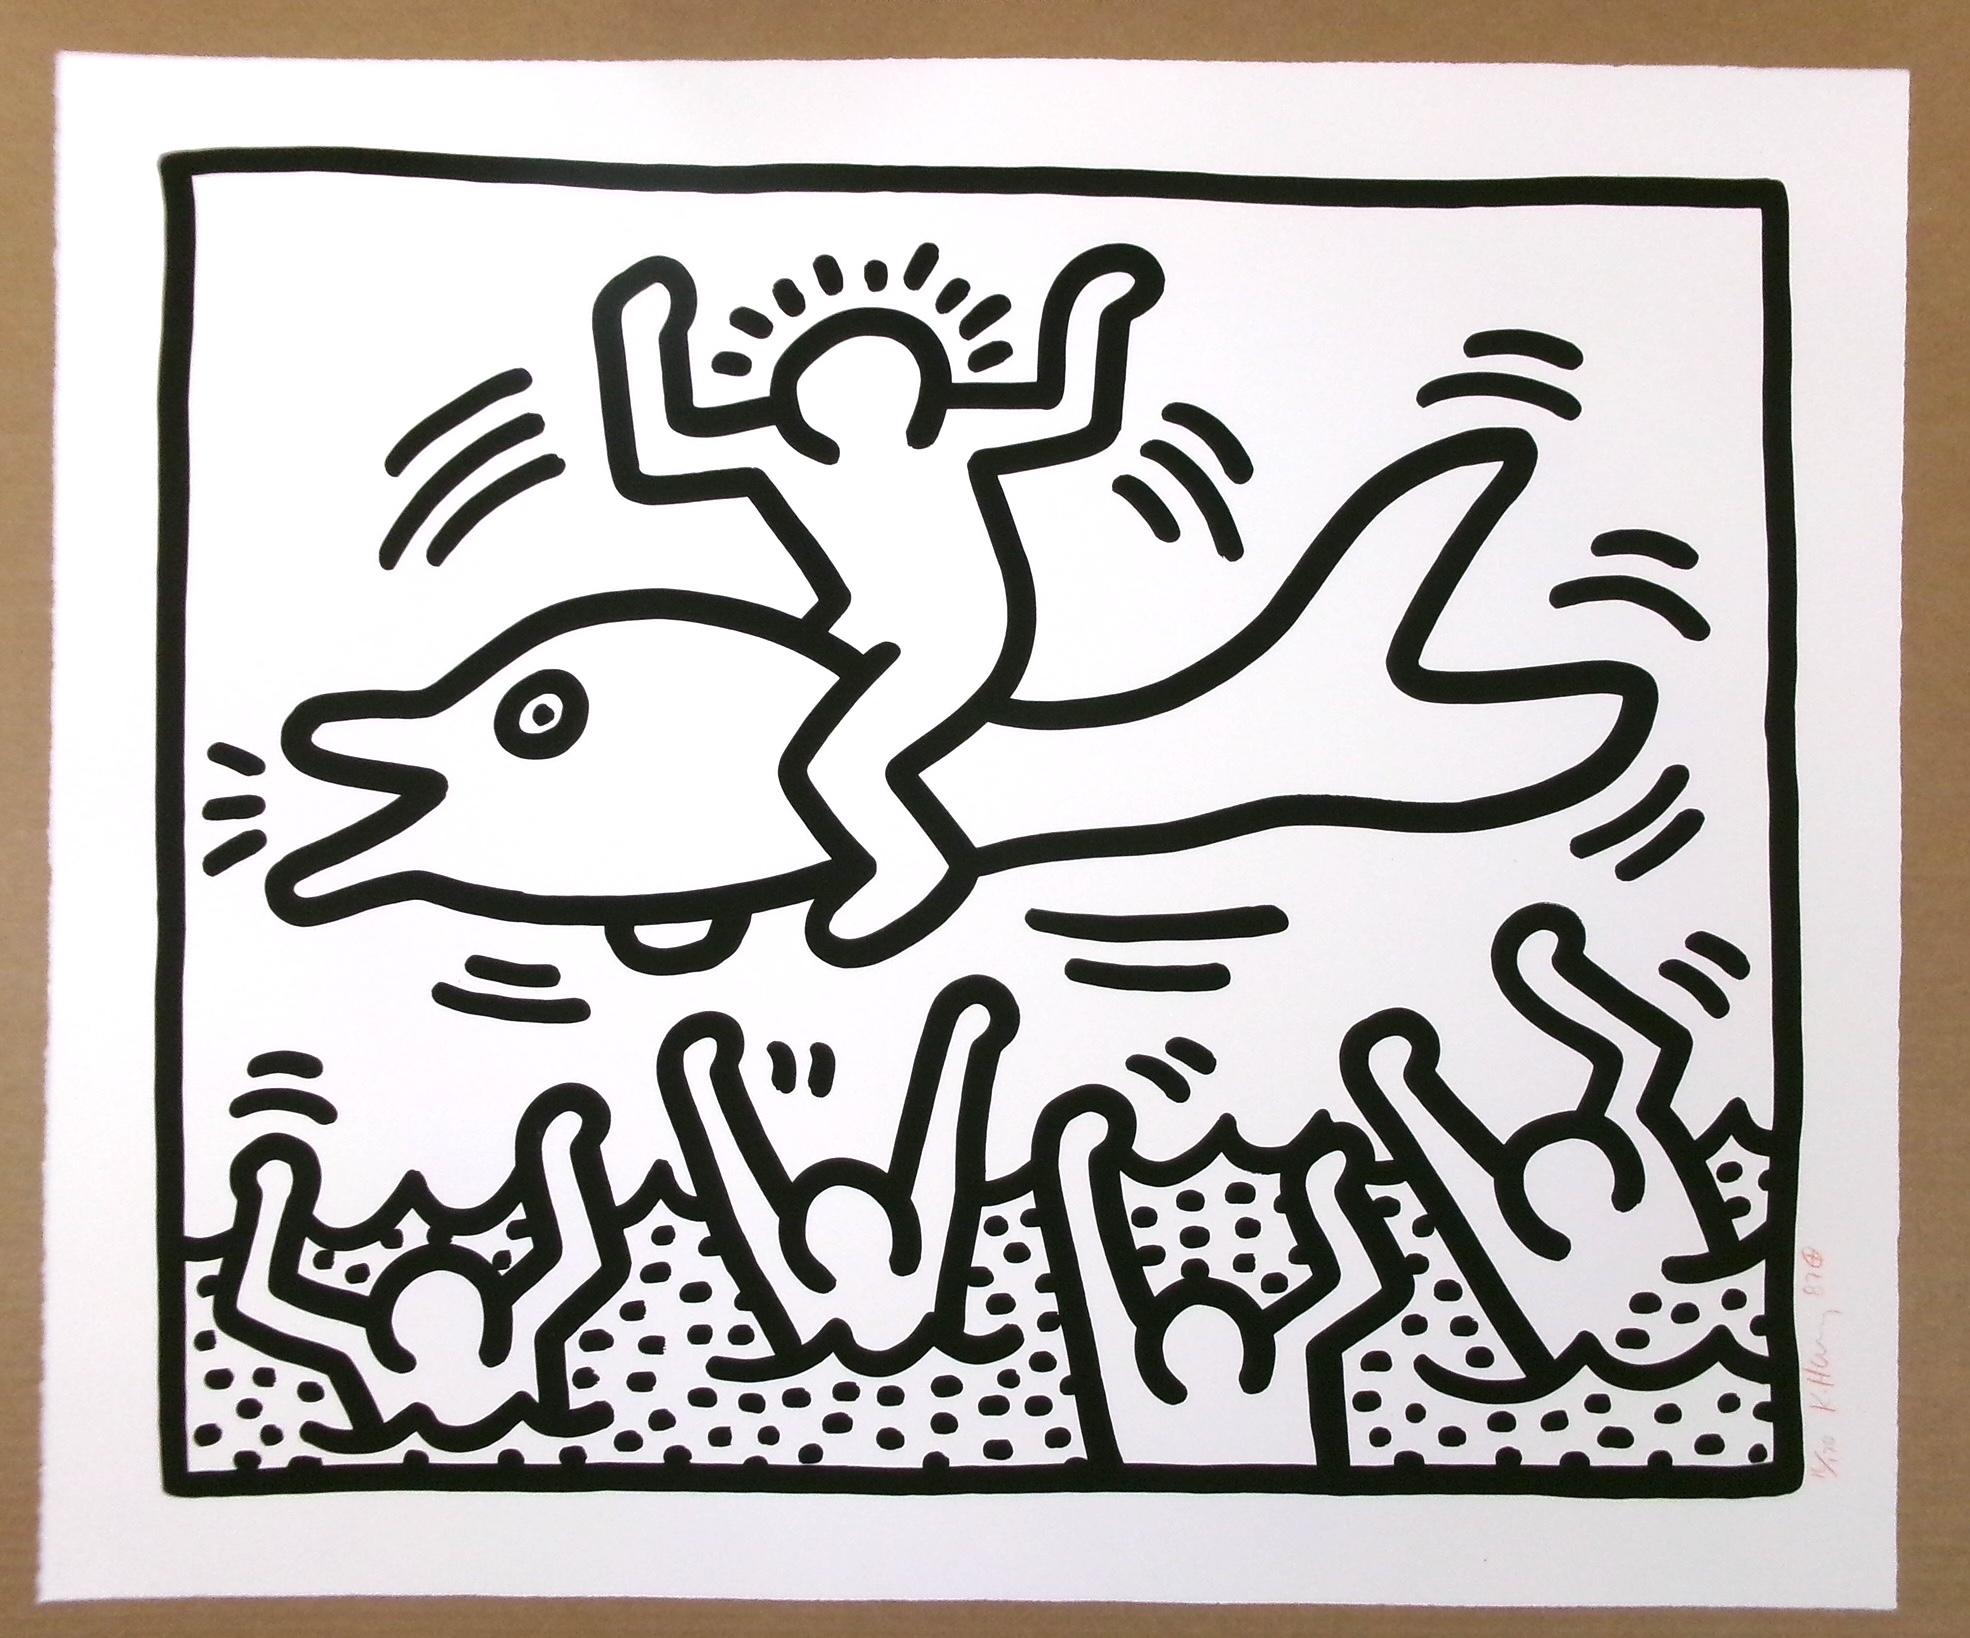 Untitled - Print by Keith Haring